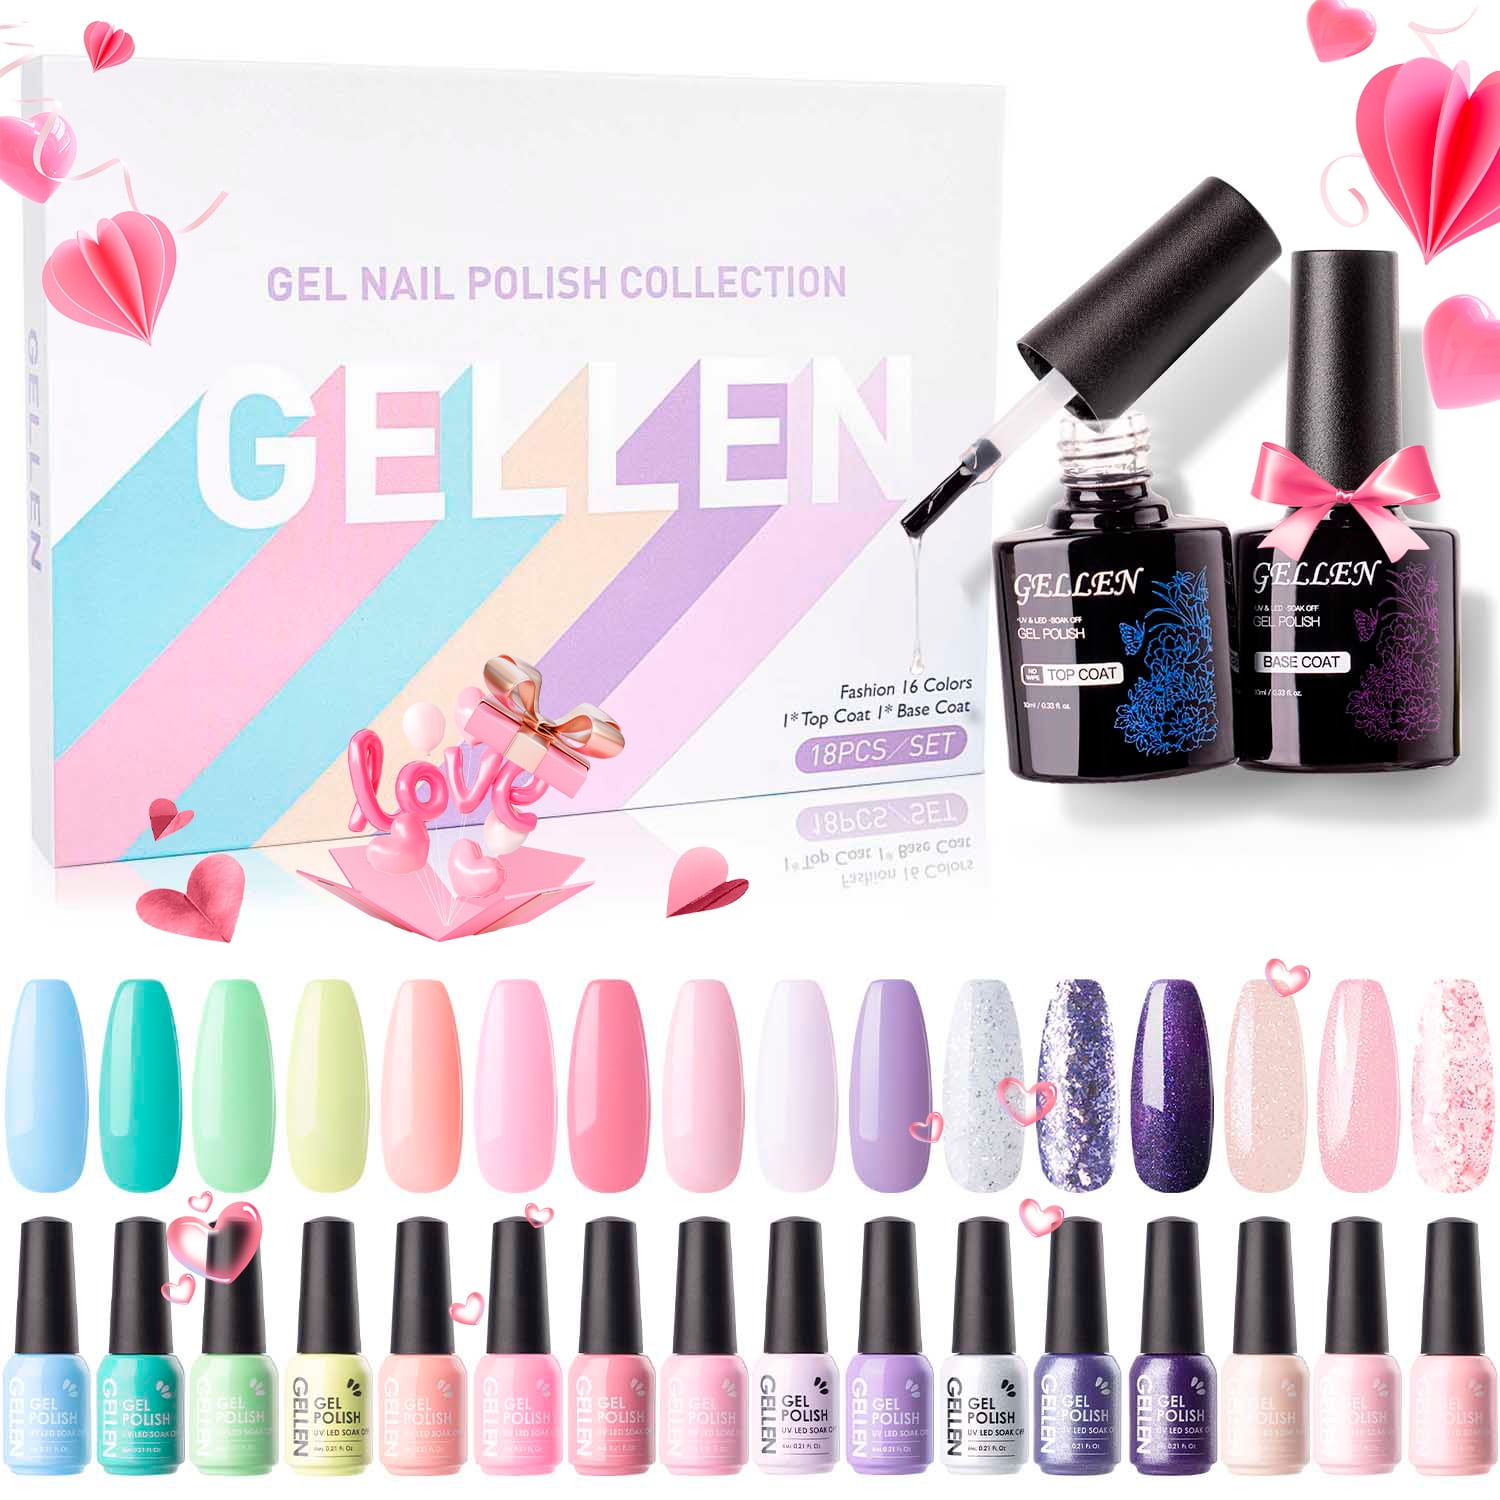 Buy Gellen UV Gel Nail Polish Kit - Popular Nude Colors Series, 6 Colors  8ml Each Nail Gel Manicure Set Online at Low Prices in India - Amazon.in